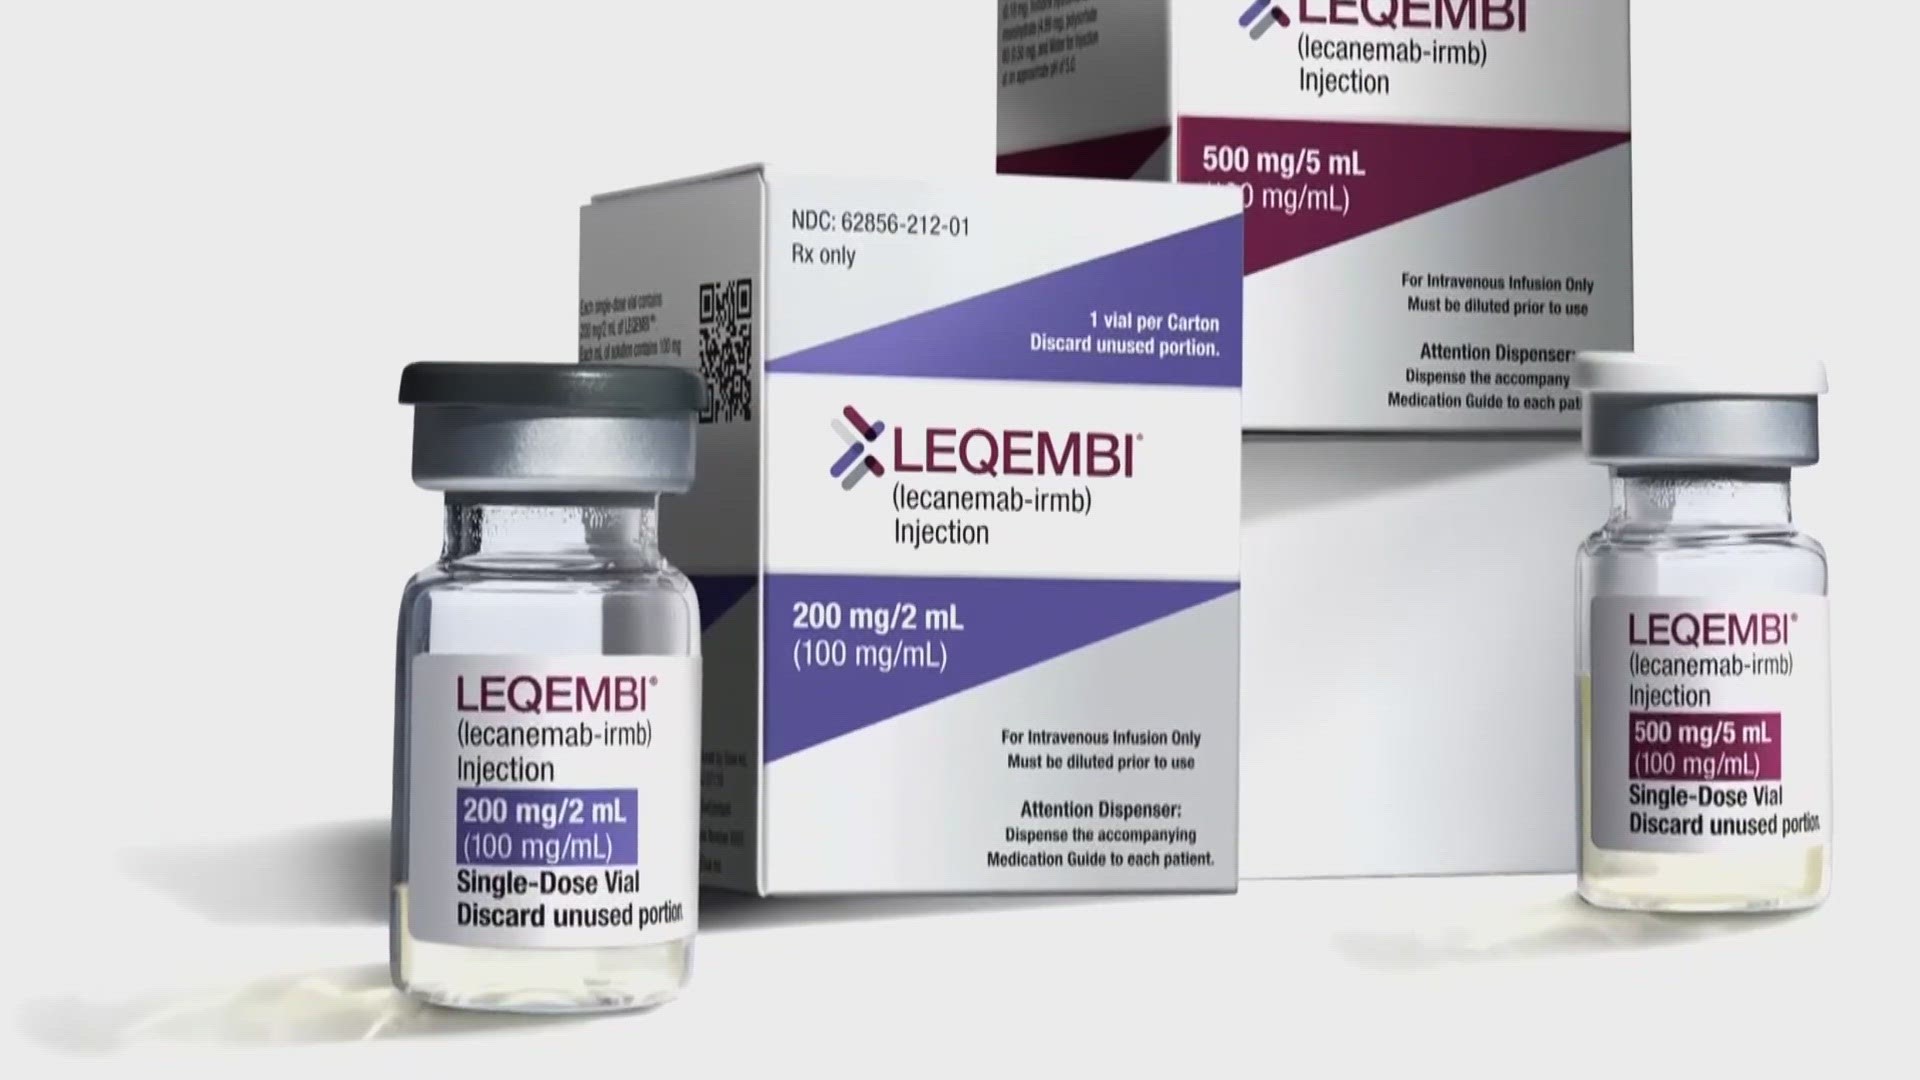 That breakthrough Alzheimer’s drug that was recently FDA approved, but now there is new concern that some people will not be able to afford the medication.